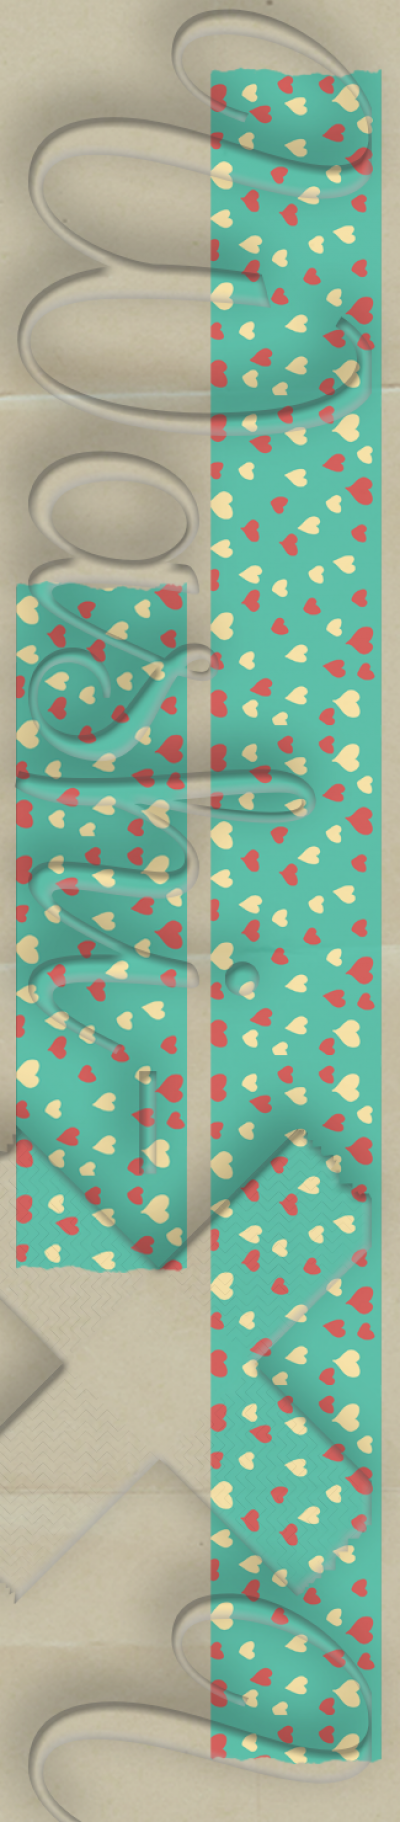 Red-white hearts patterned washi tape